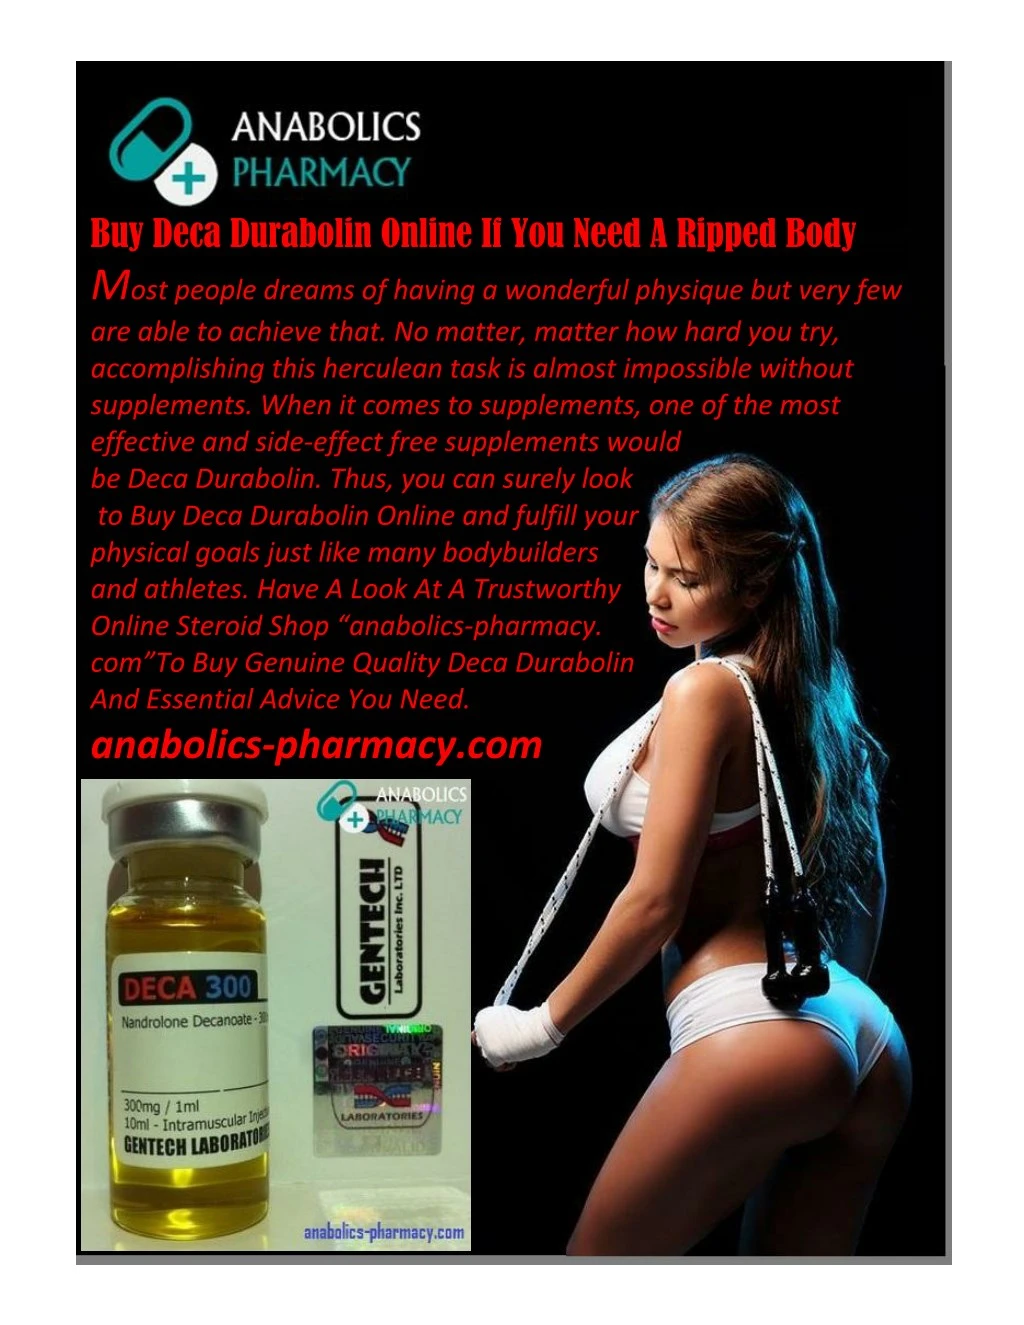 buy deca durabolin online if you need a ripped